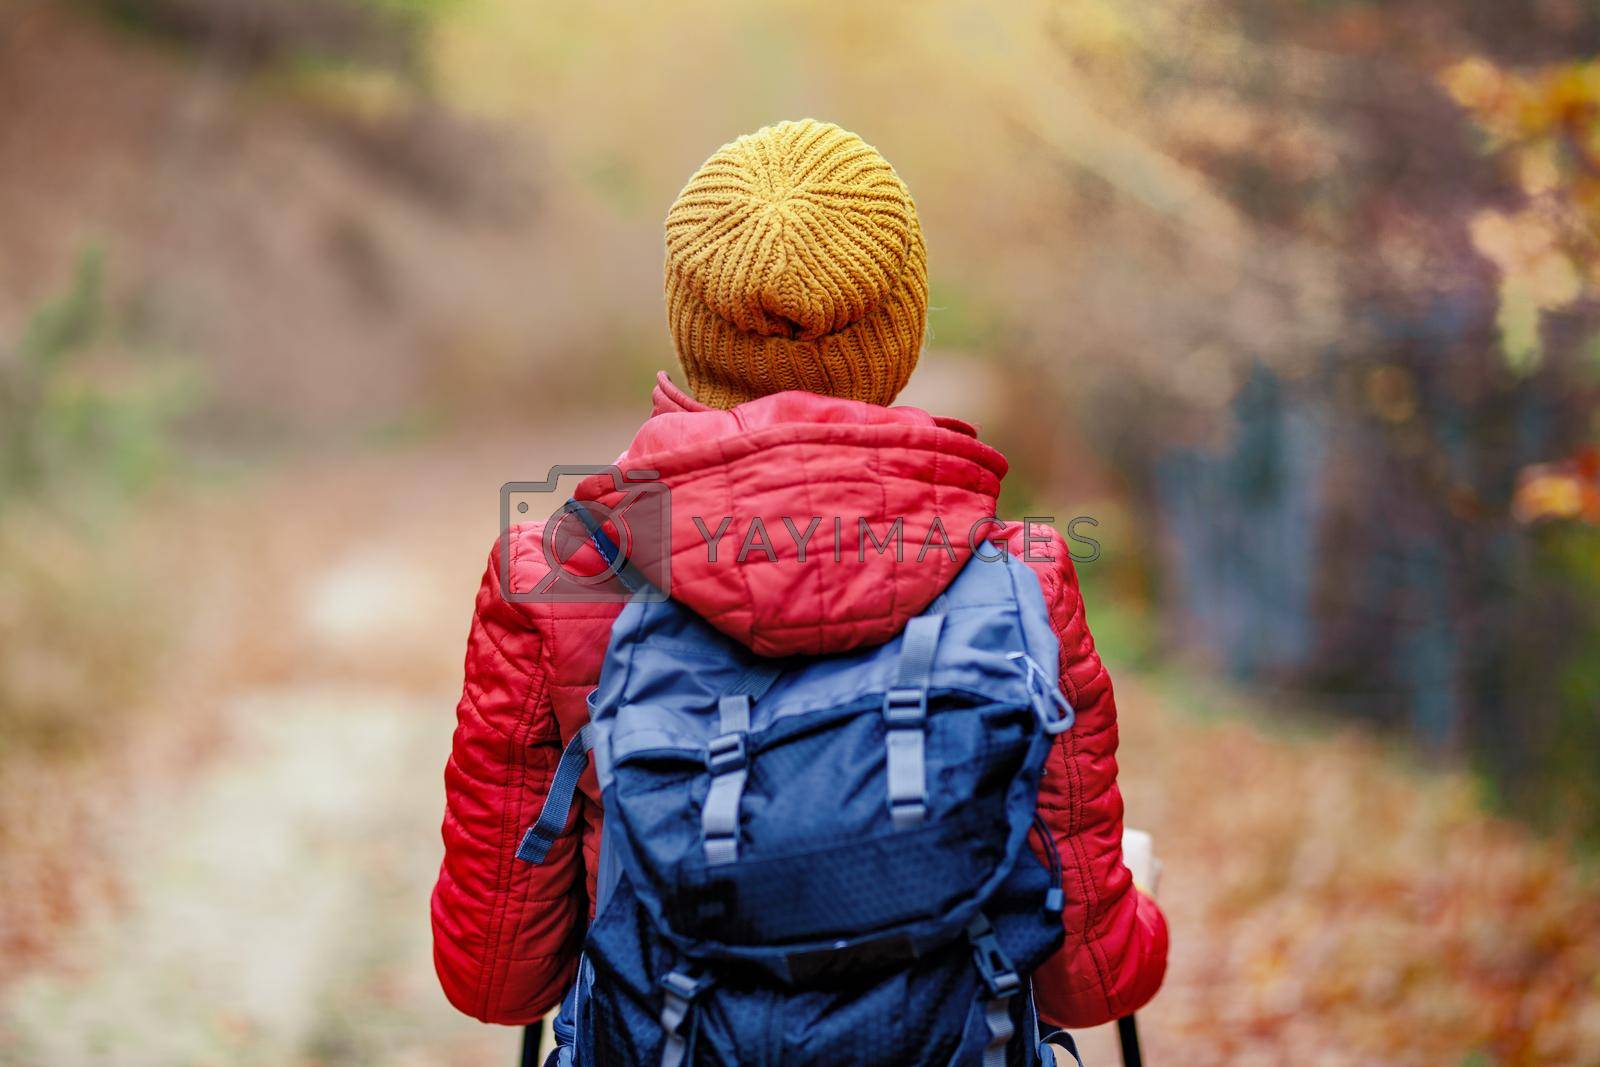 Hiking girl with poles and backpack on a trail. Backview. Travel and healthy lifestyle outdoors in fall season.